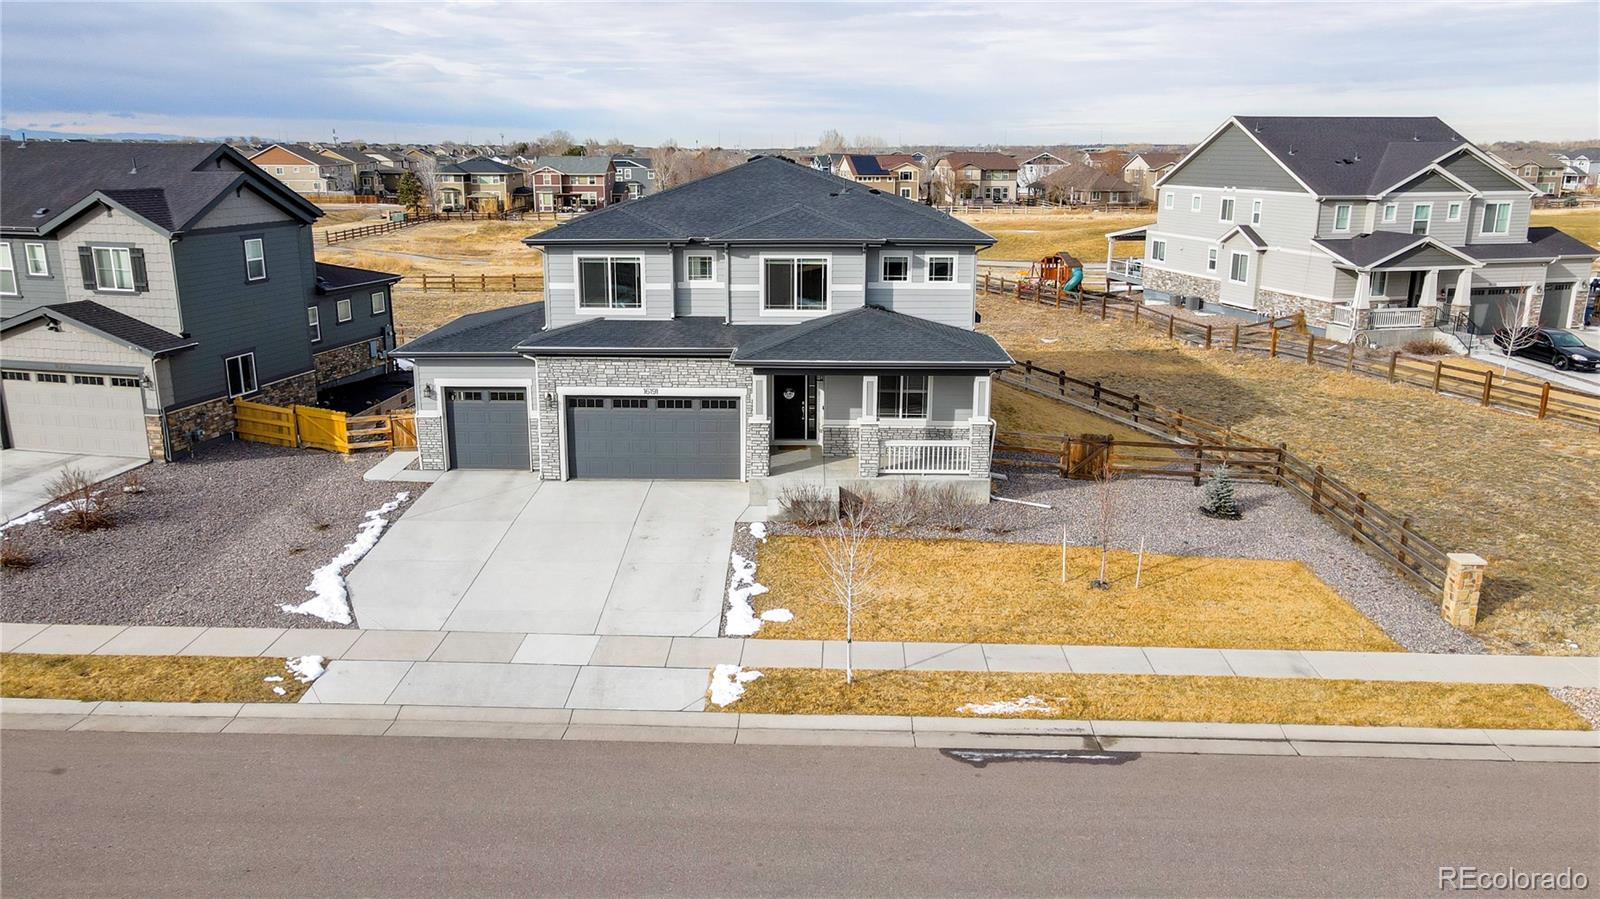 16191  buffalo run drive, Commerce City sold home. Closed on 2024-04-19 for $785,000.